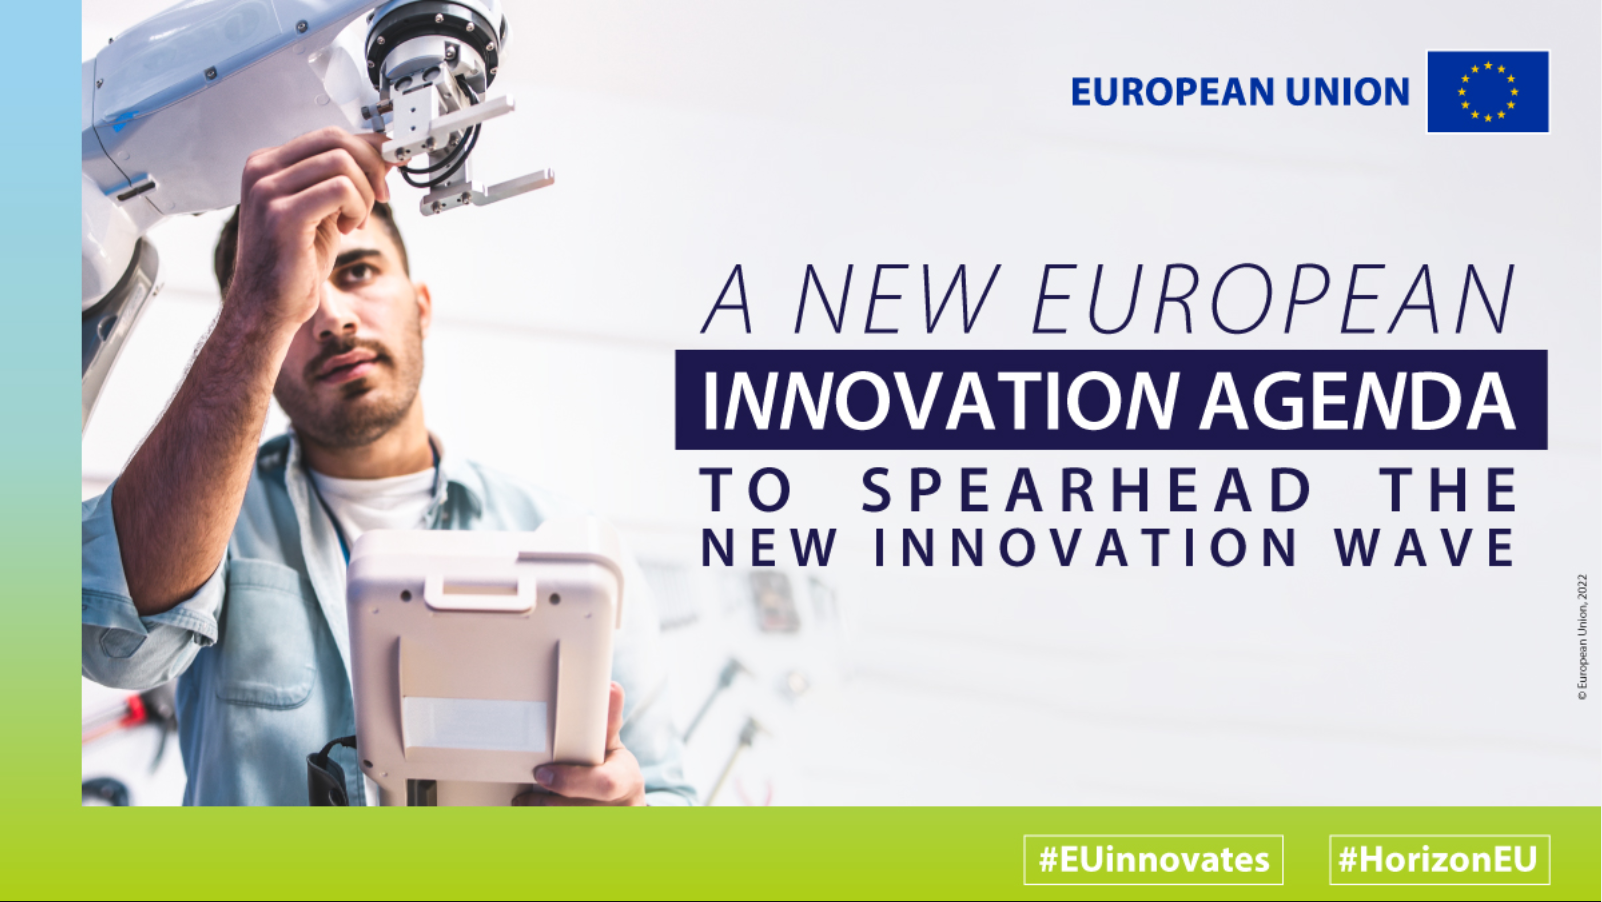 Commission launches €122 million calls for proposals to bridge innovation gaps across the EU and empower innovation ecosystems